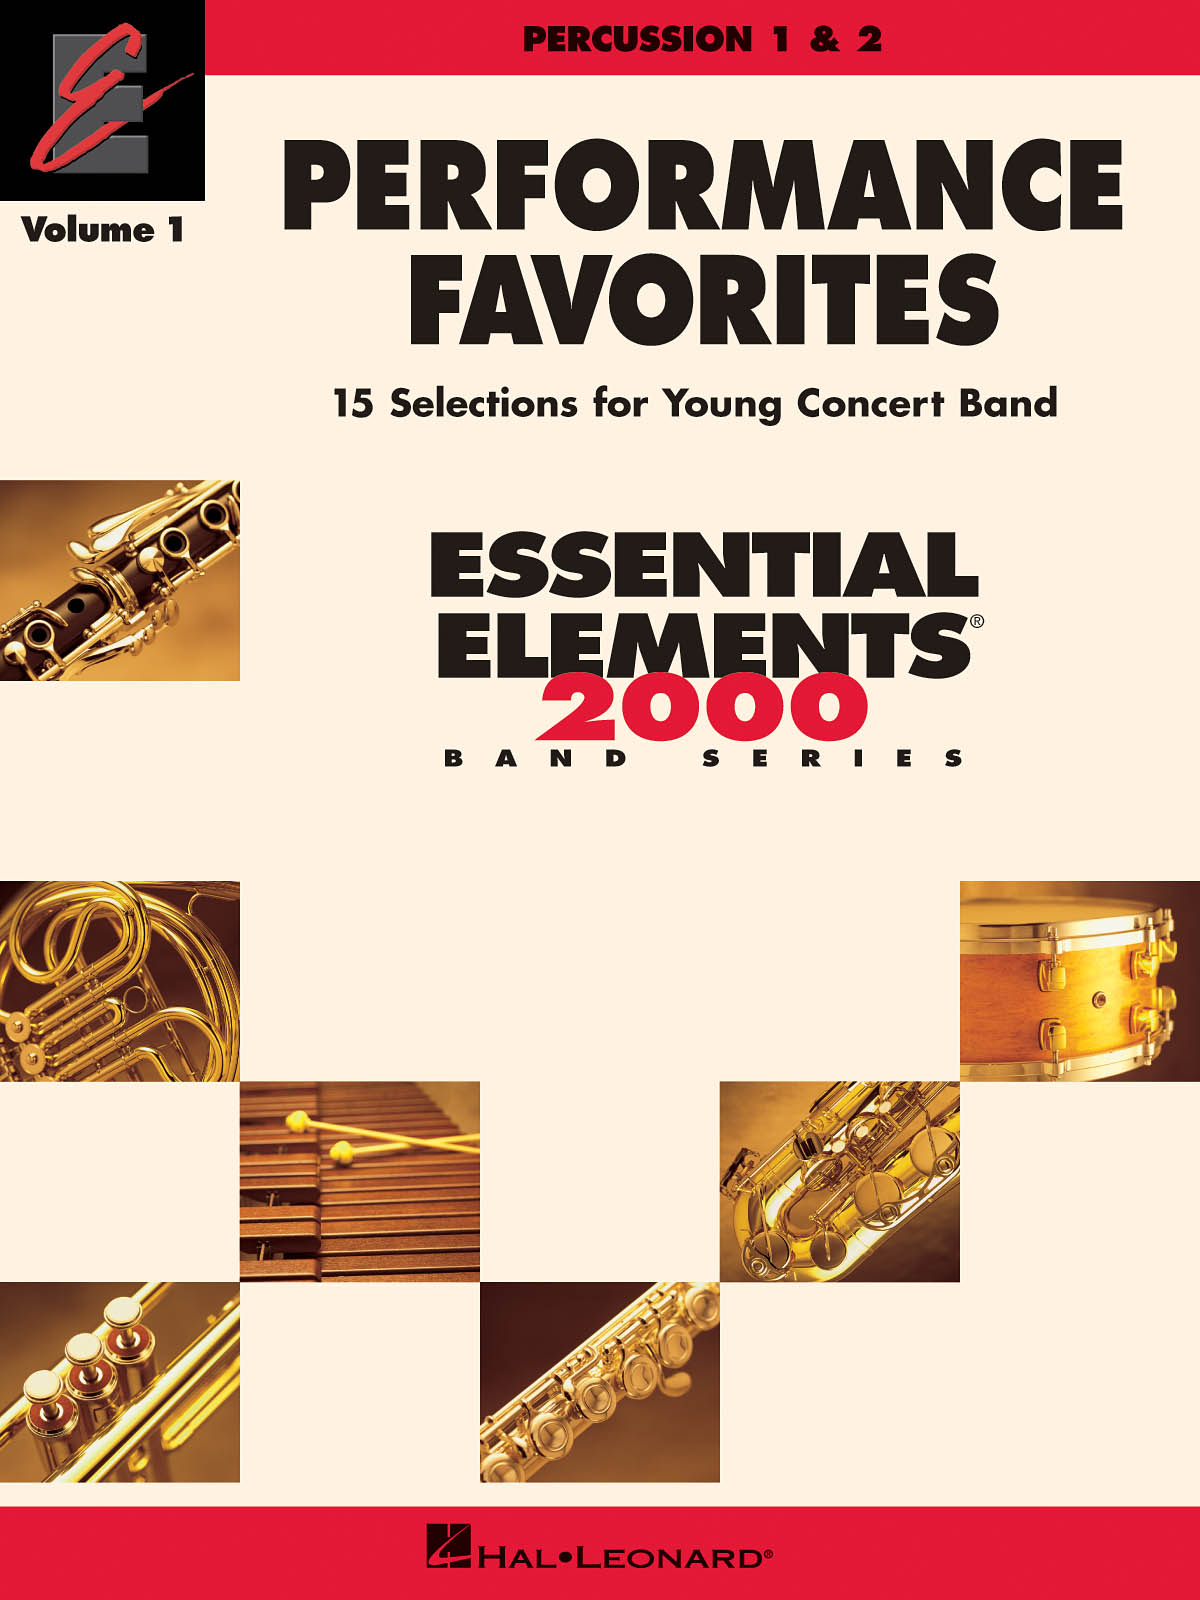 Performance Favorites Vol. 1 - Percussion 1 & 2 - 15 Selections for Young Concert Band - noty pro bicí nástroje